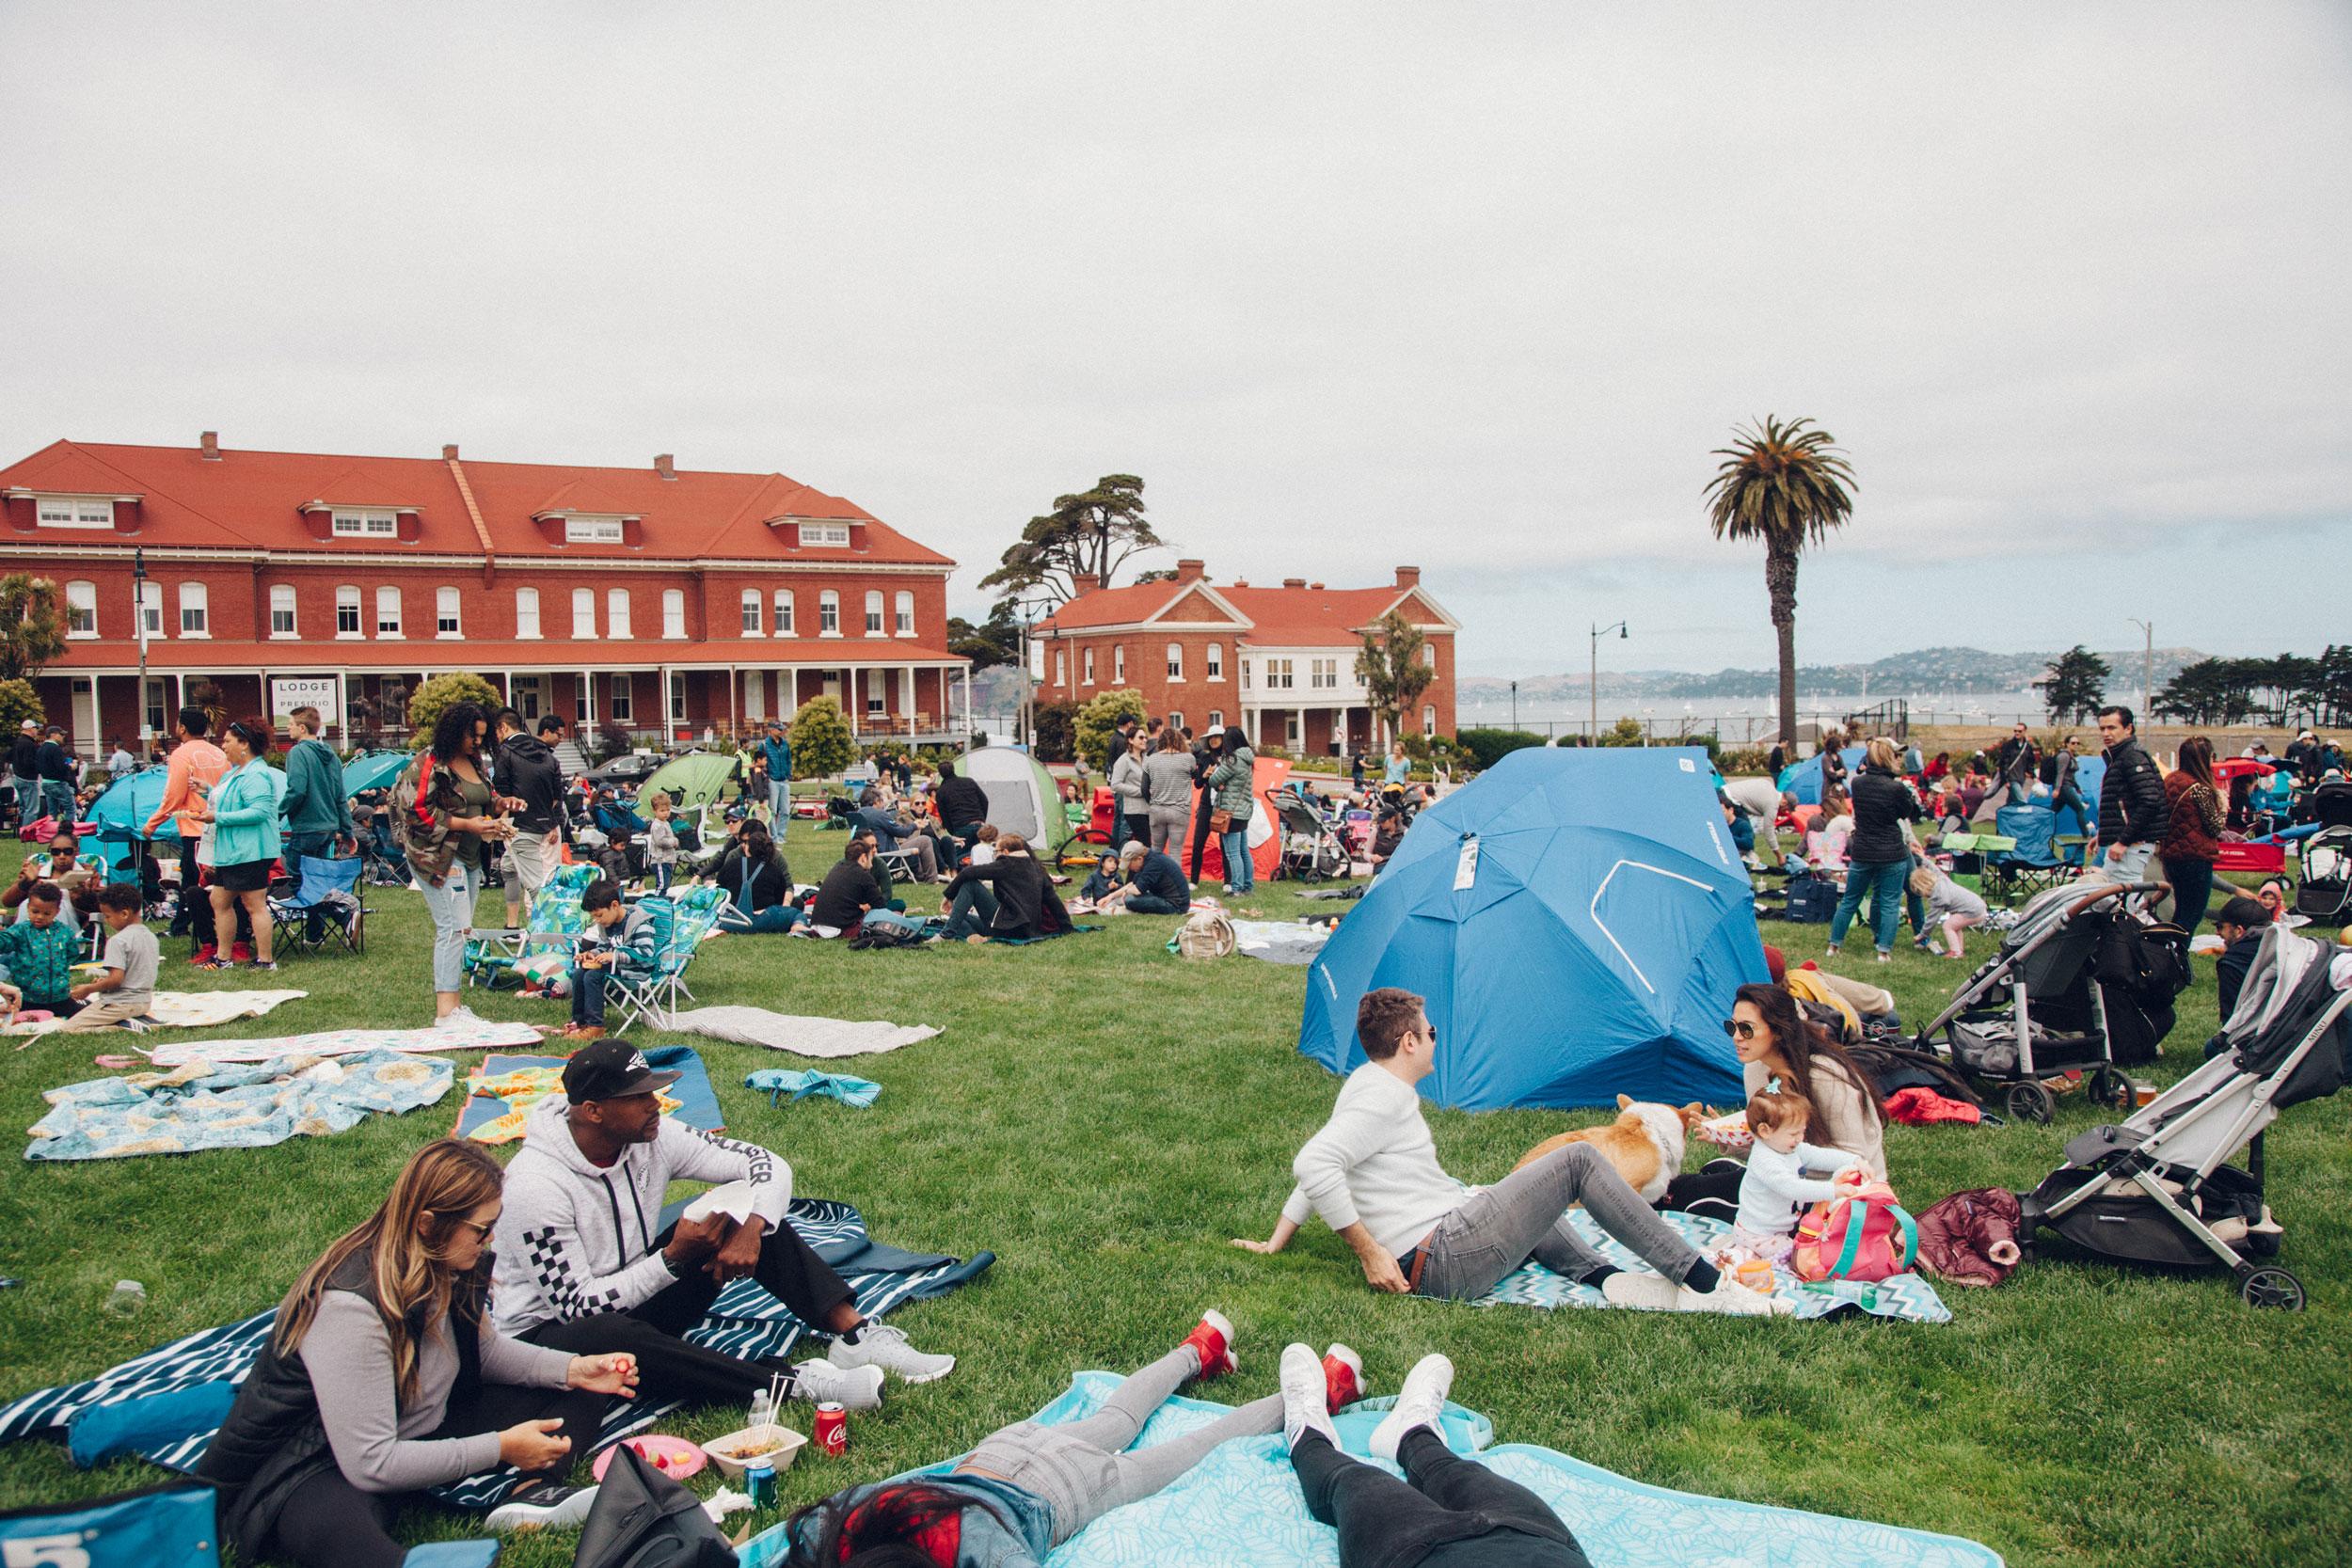 Picnickers with blankets, tents, strollers, chairs on Main Parade Lawn